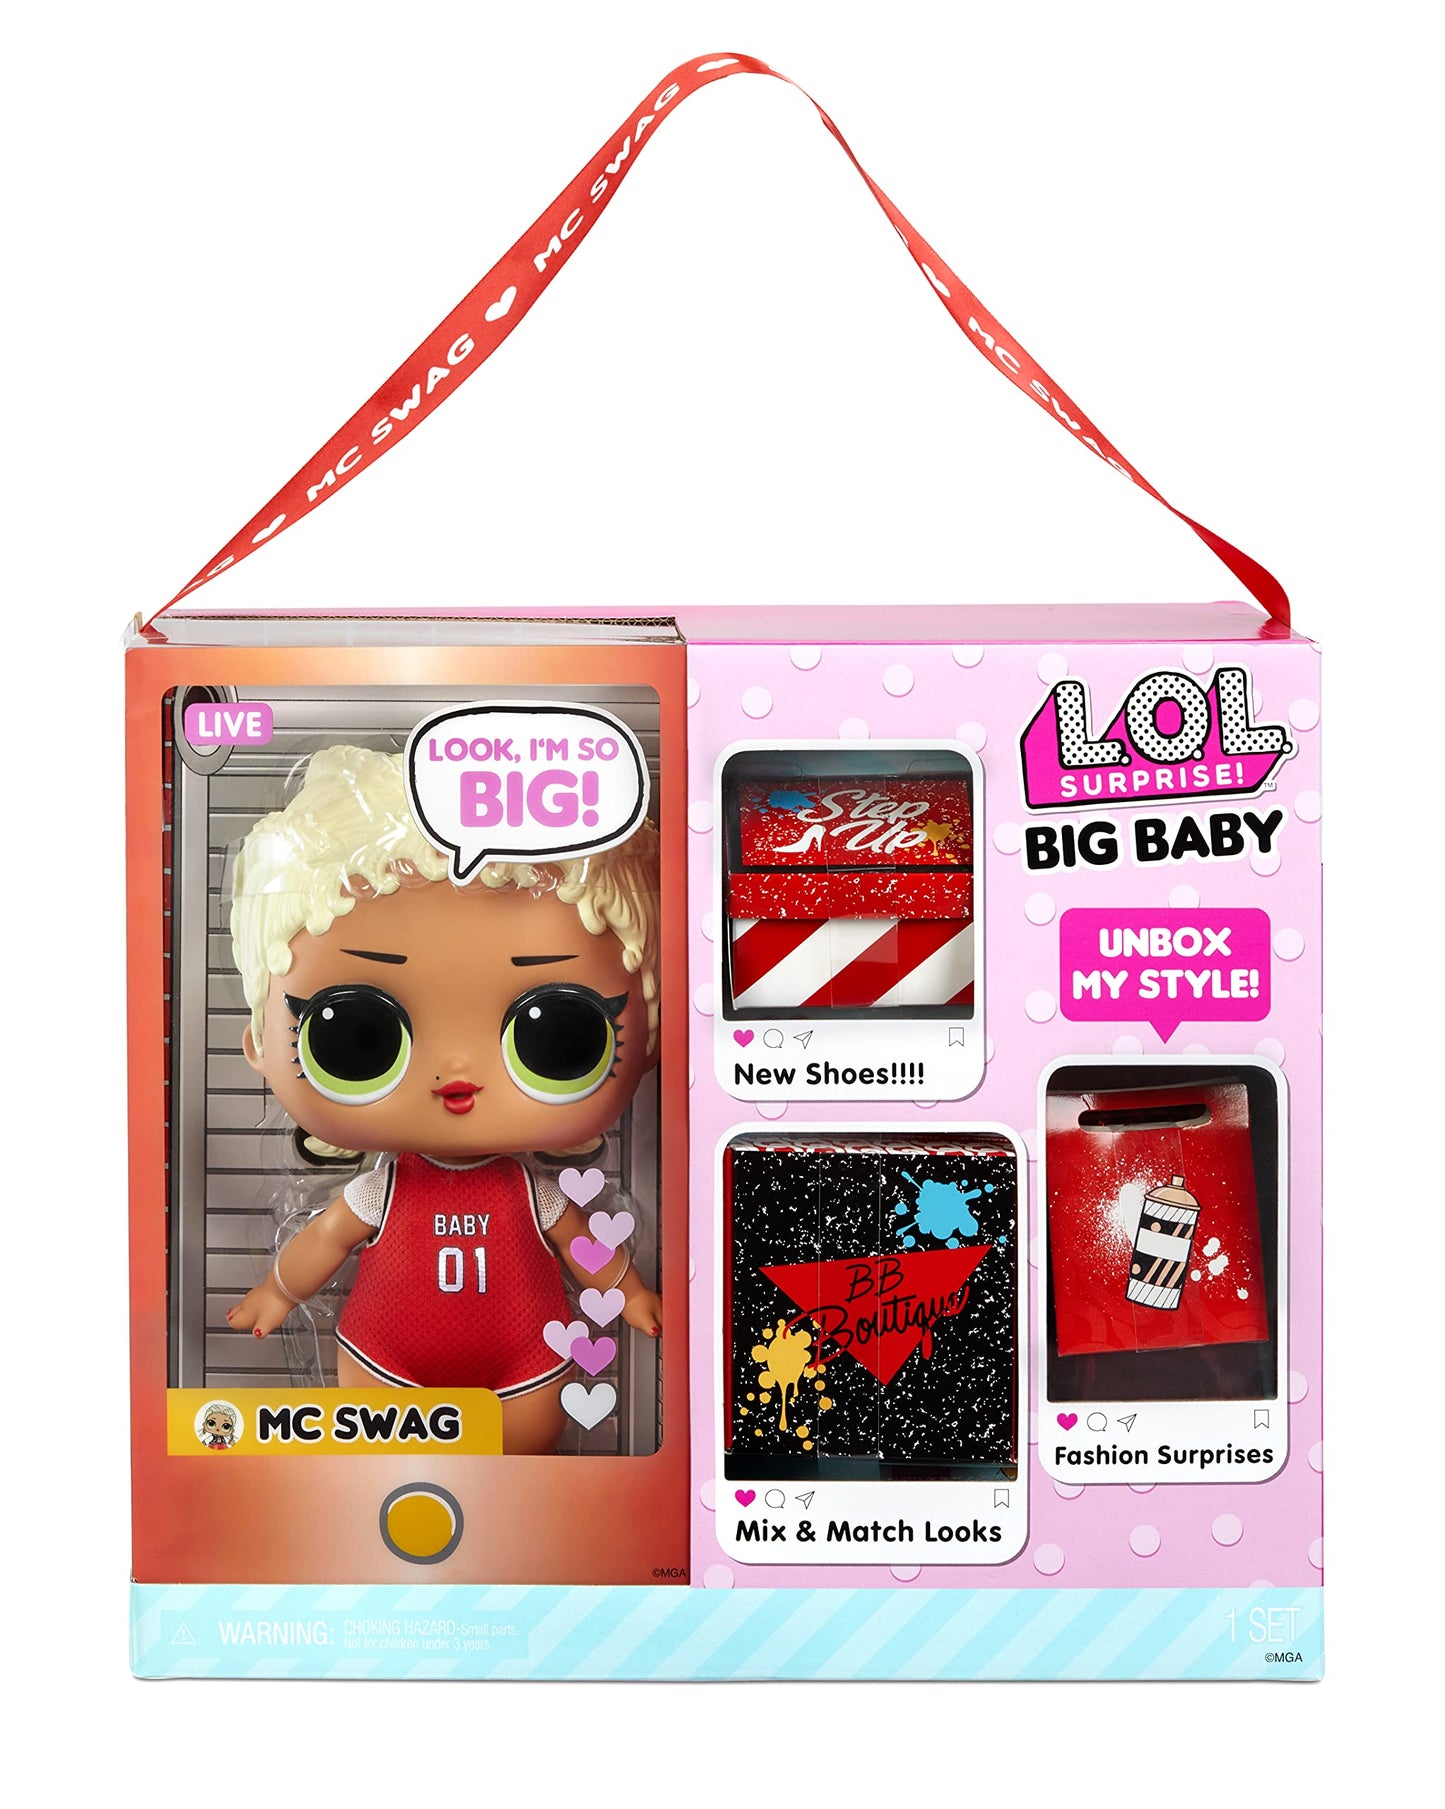 L.O.L. Surprise! Big Baby MC Swag - 11" Large ,Doll with Colorful, Mix & Match Fashion Accessories, Wear and Share Earrings, Collectible Gift for Kids, Toy for Girls Ages 4 5 6 7+ Years Old